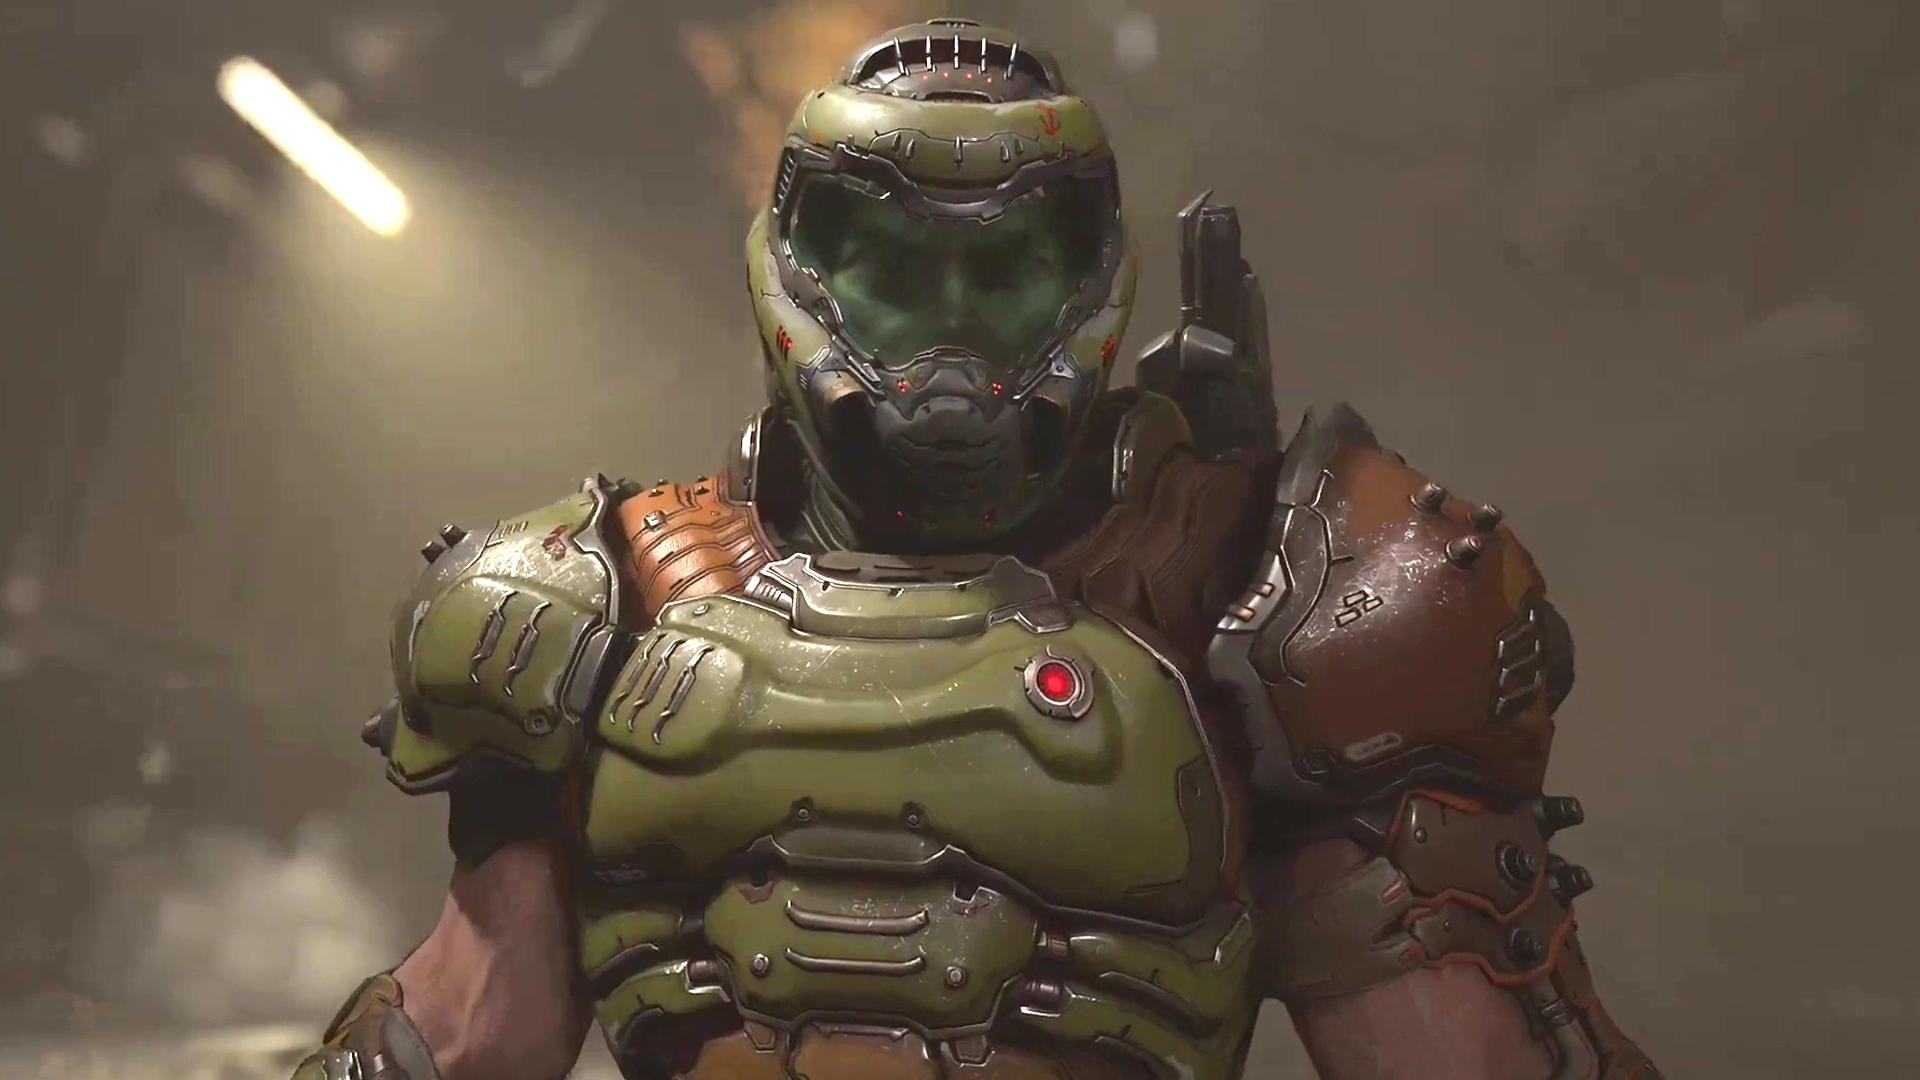 Doom Eternal features the series' first hub area